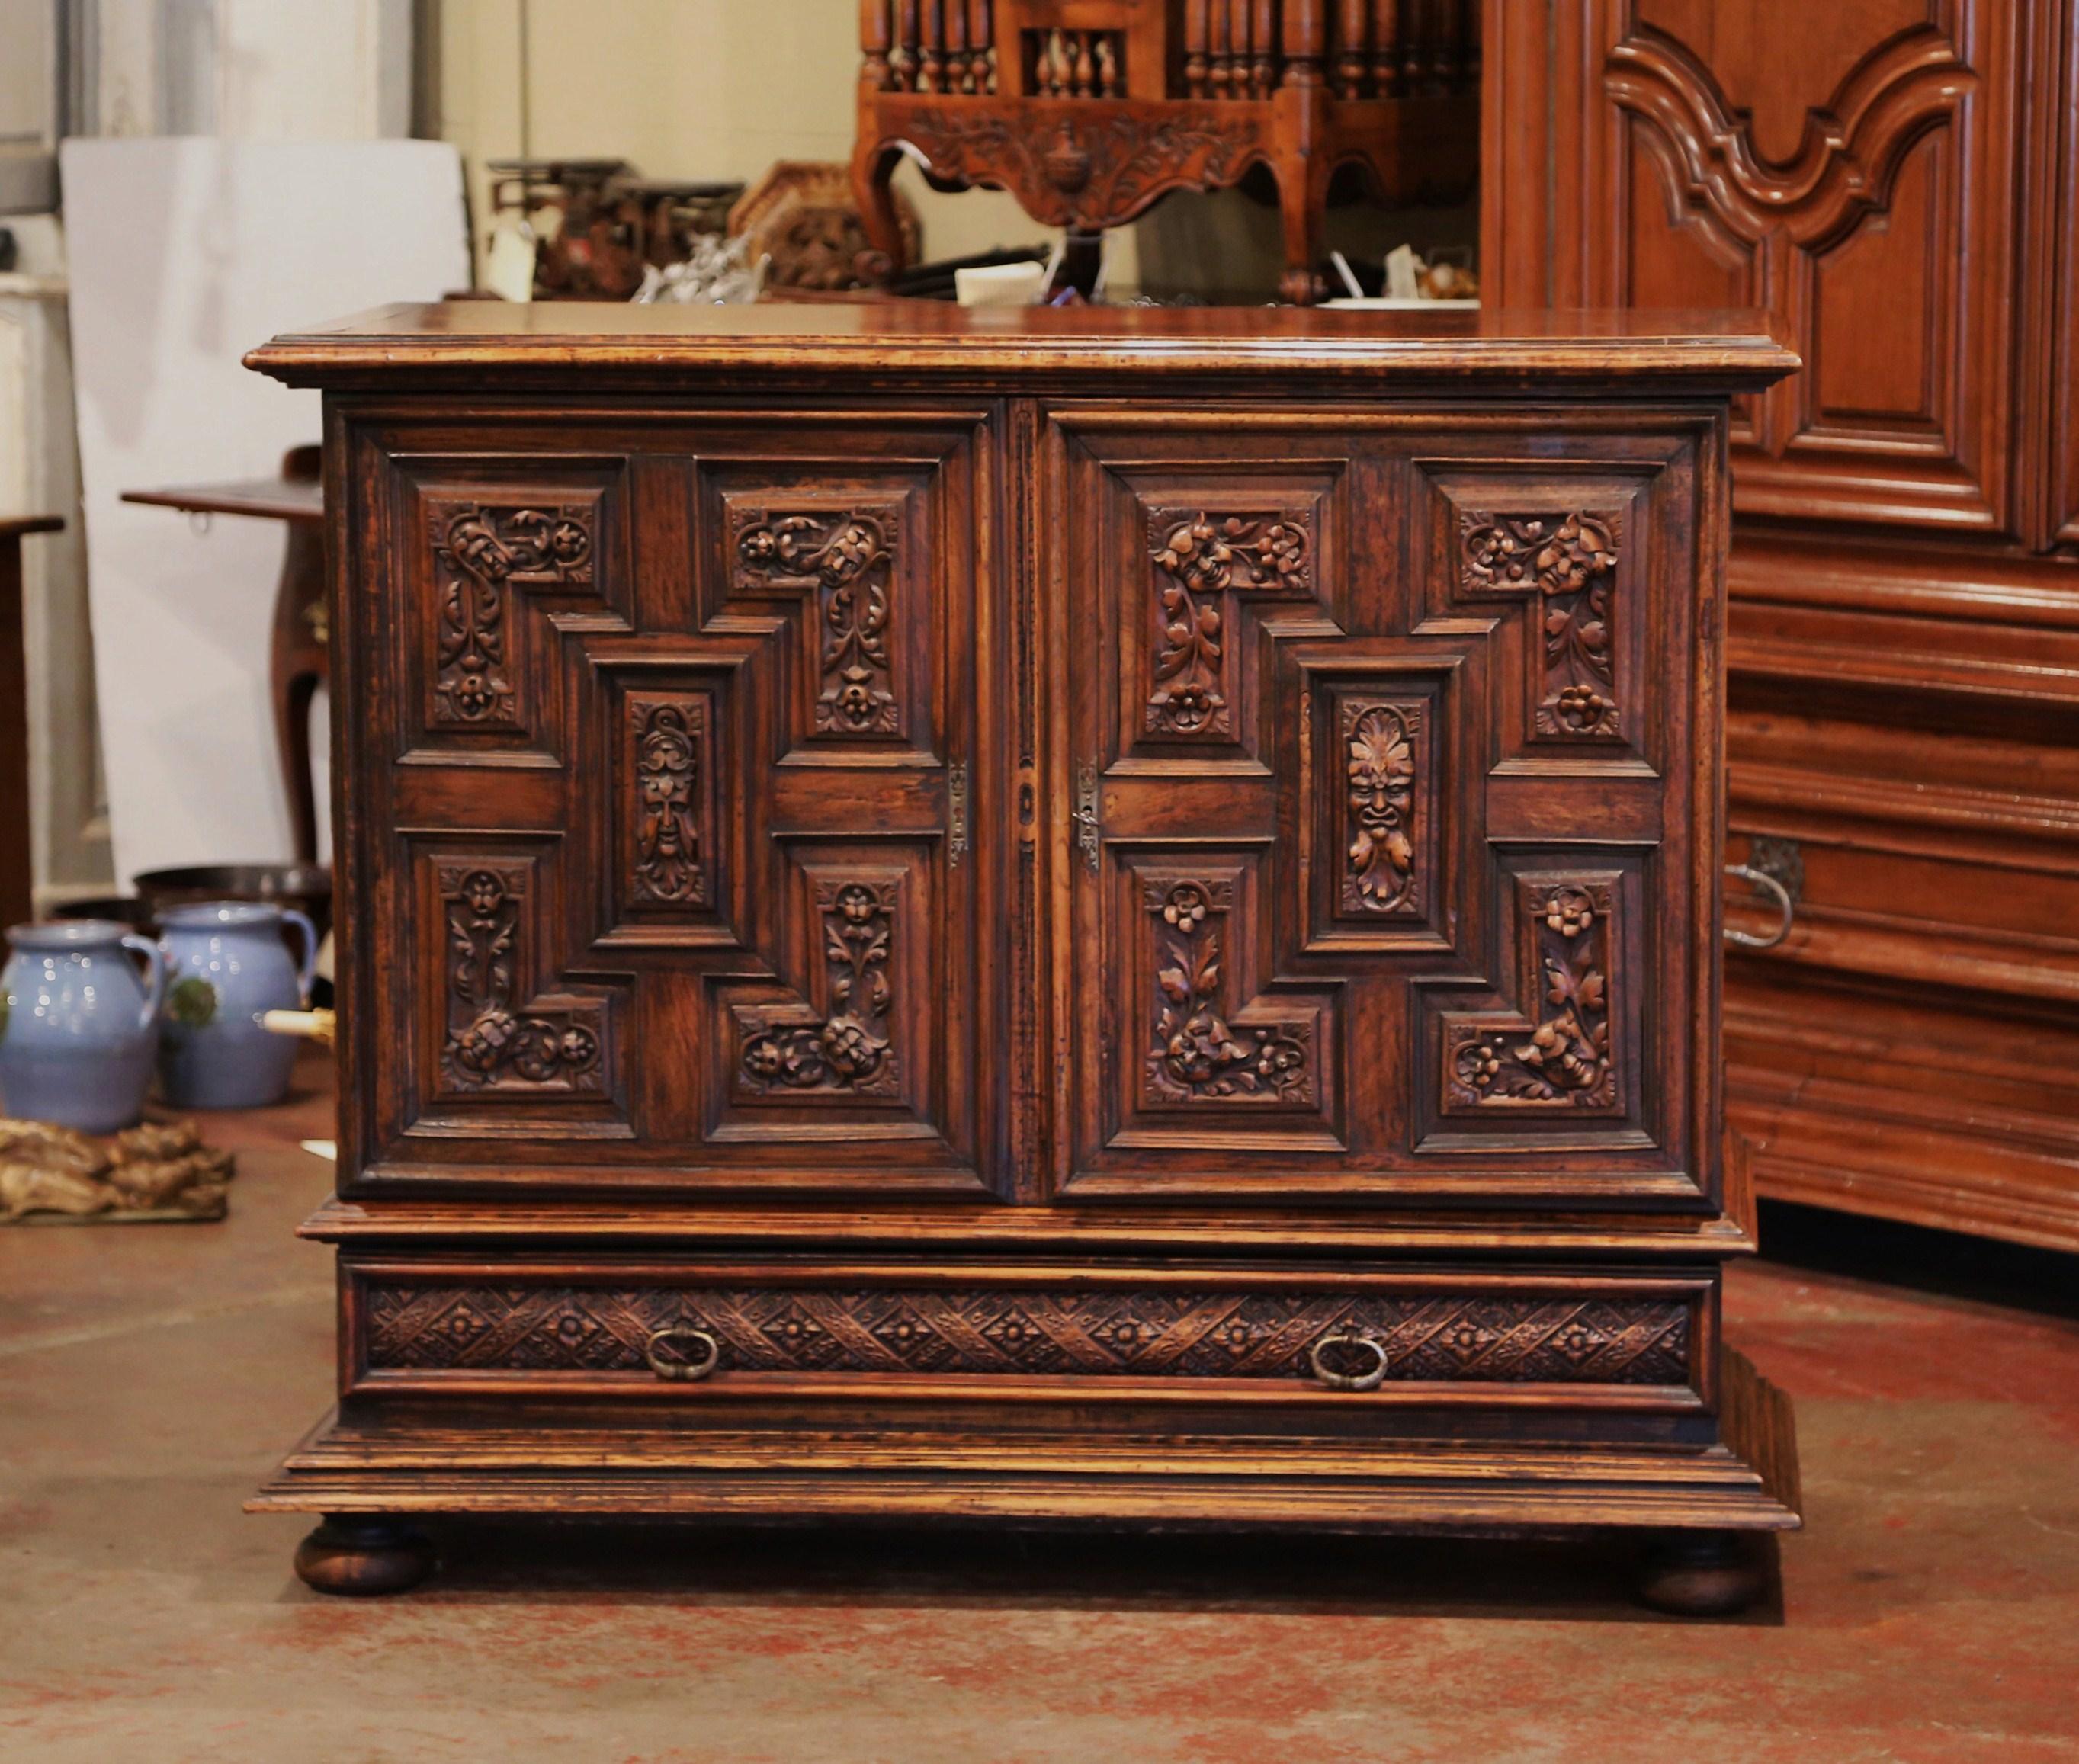 This elegant carved cabinet was crafted in Italy, circa 1860, made of walnut, the tall fruitwood buffet stands on bun feet, and features two heavily carved doors with chocolate raised panels decorated with foliage and head figures. When open, the